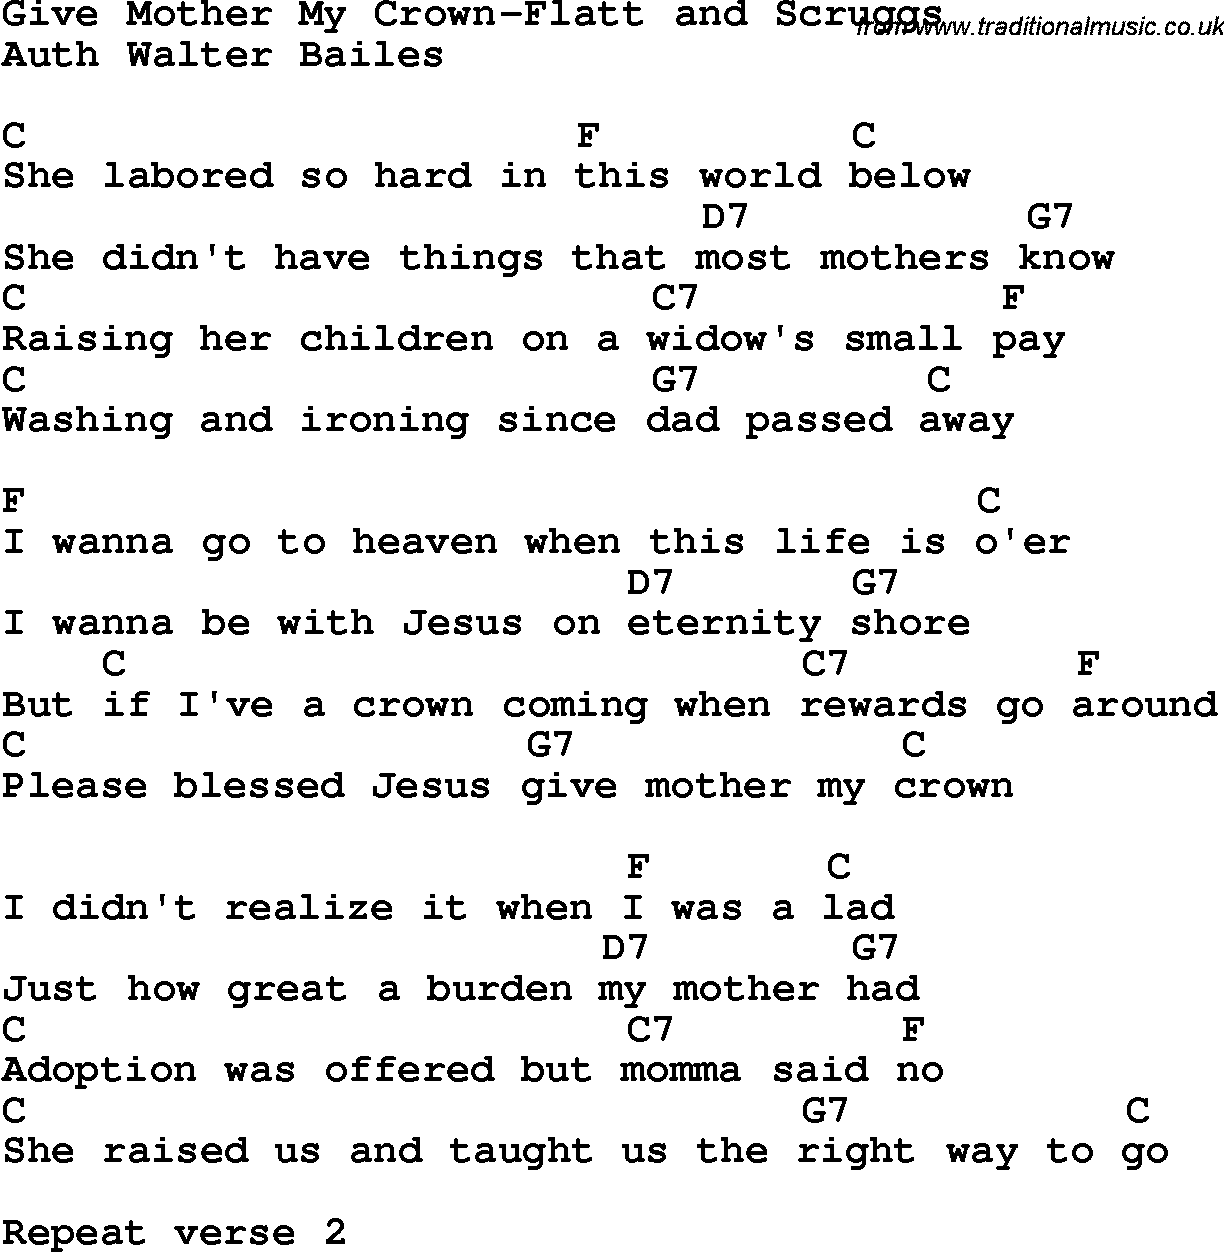 Country, Southern and Bluegrass Gospel Song Give Mother My Crown-Flatt and Scruggs lyrics and chords